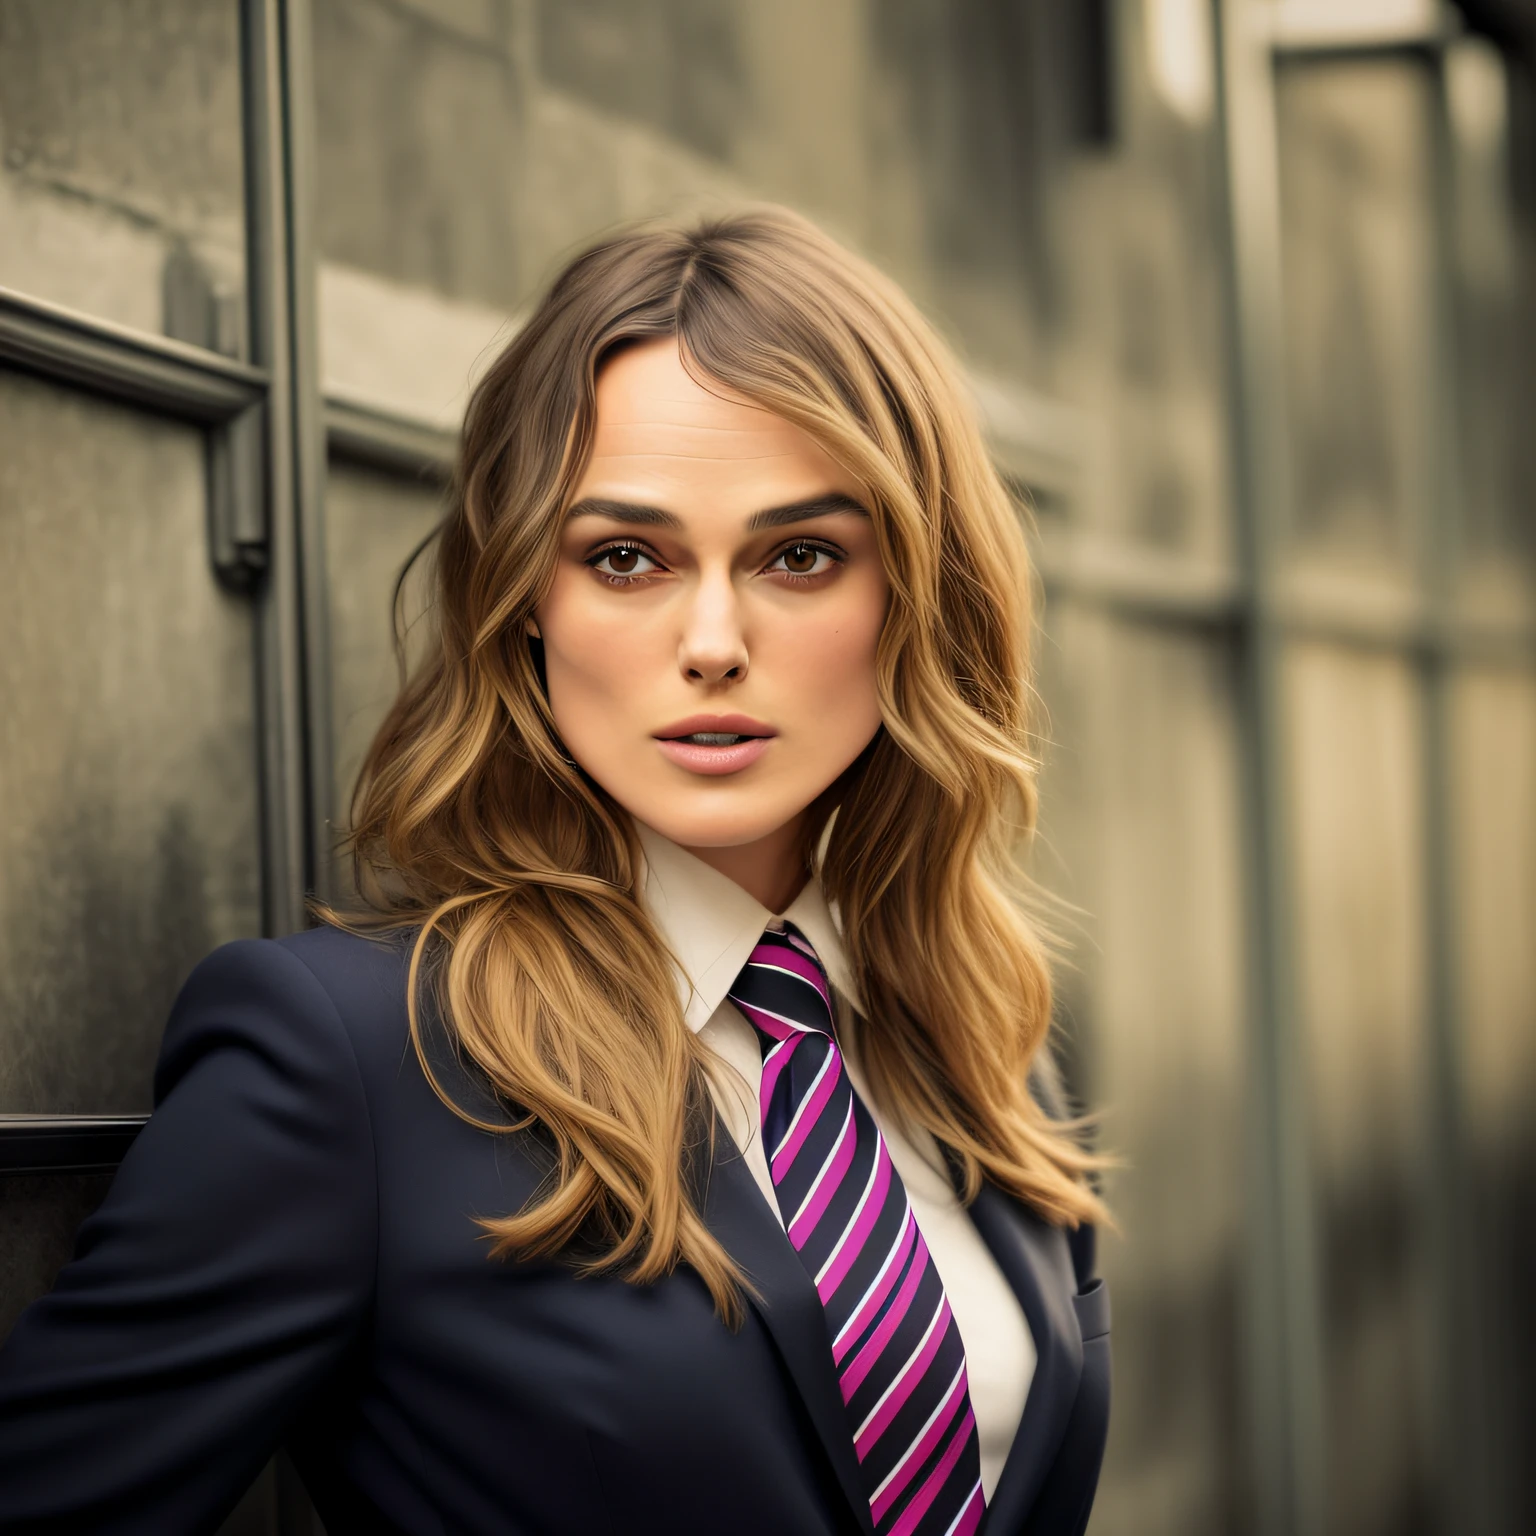 Keira Knightley in a 套装 and tie leaning against a wall, girl in 套装, girl in a 套装, wearing a strict business 套装, in strict 套装, wearing 套装 and tie, woman in business 套装, wearing a 套装 and a tie, wearing a 套装 and tie, wearing business 套装, in a strict 套装, 套装 ， 完美脸蛋, 年轻的商业女性